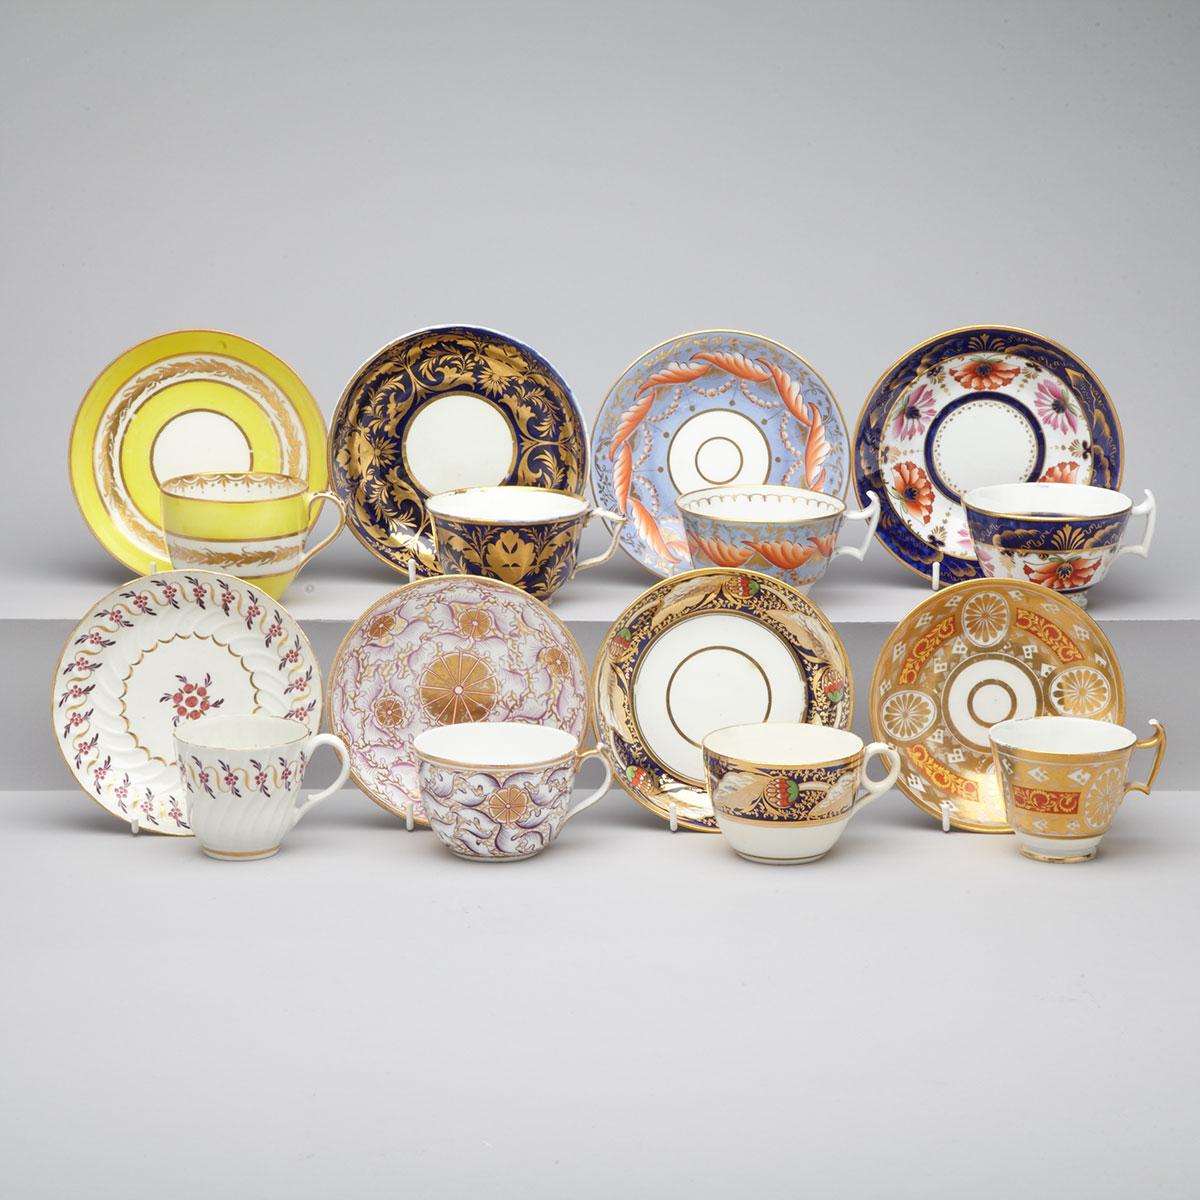 Eight Various English Porcelain Cups and Saucers, late 18th/early 19th century